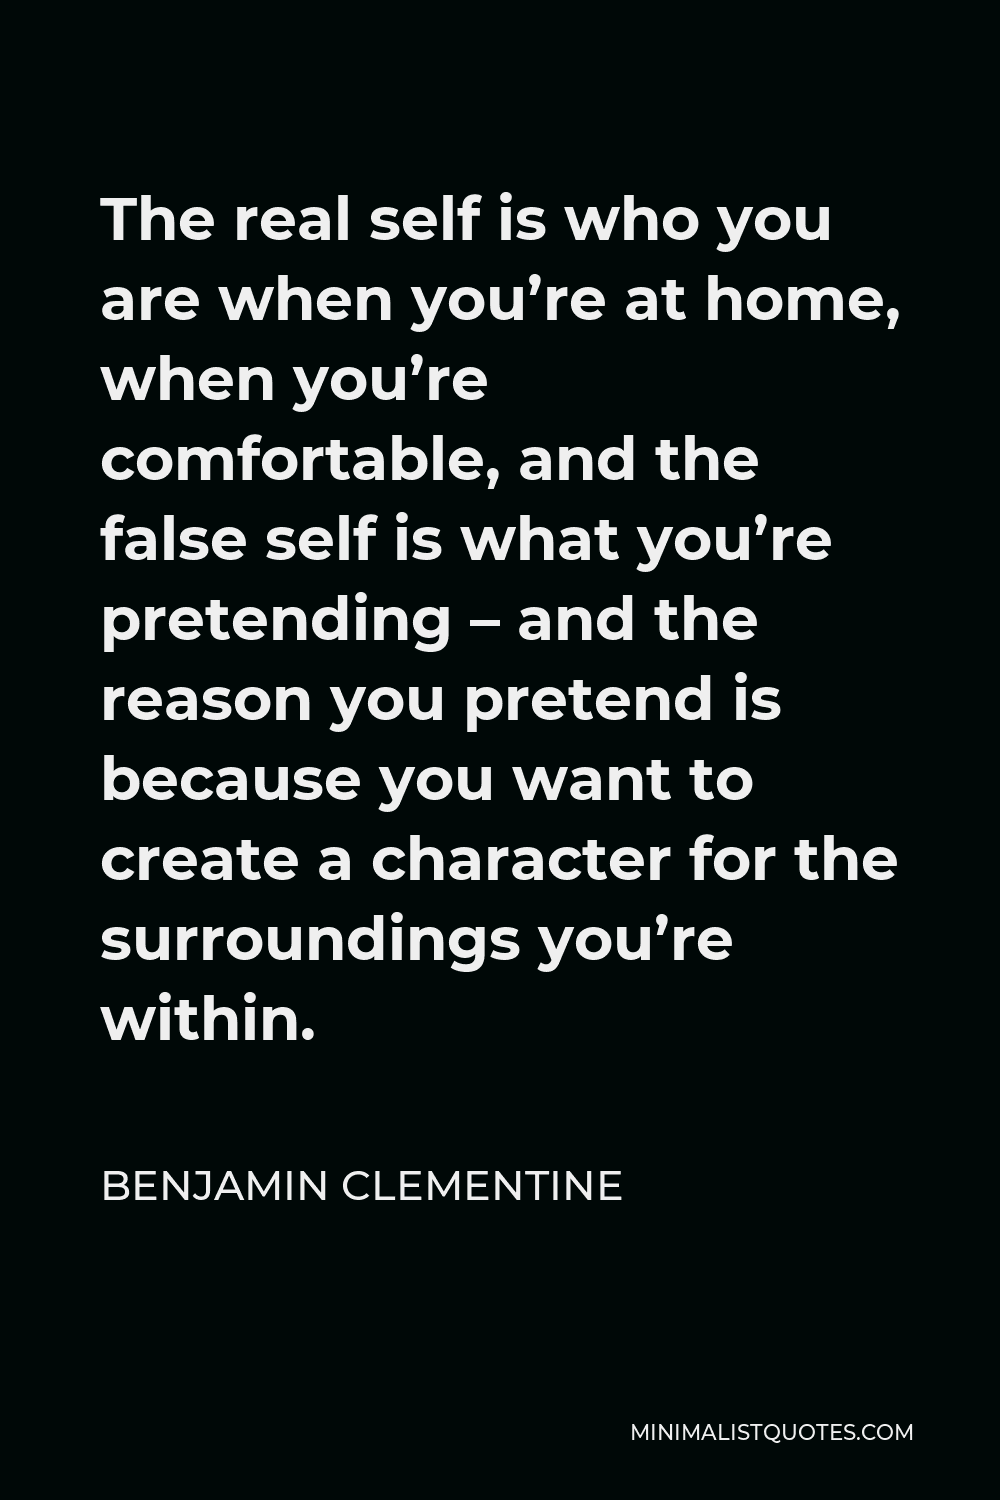 Benjamin Clementine Quote - The real self is who you are when you’re at home, when you’re comfortable, and the false self is what you’re pretending – and the reason you pretend is because you want to create a character for the surroundings you’re within.